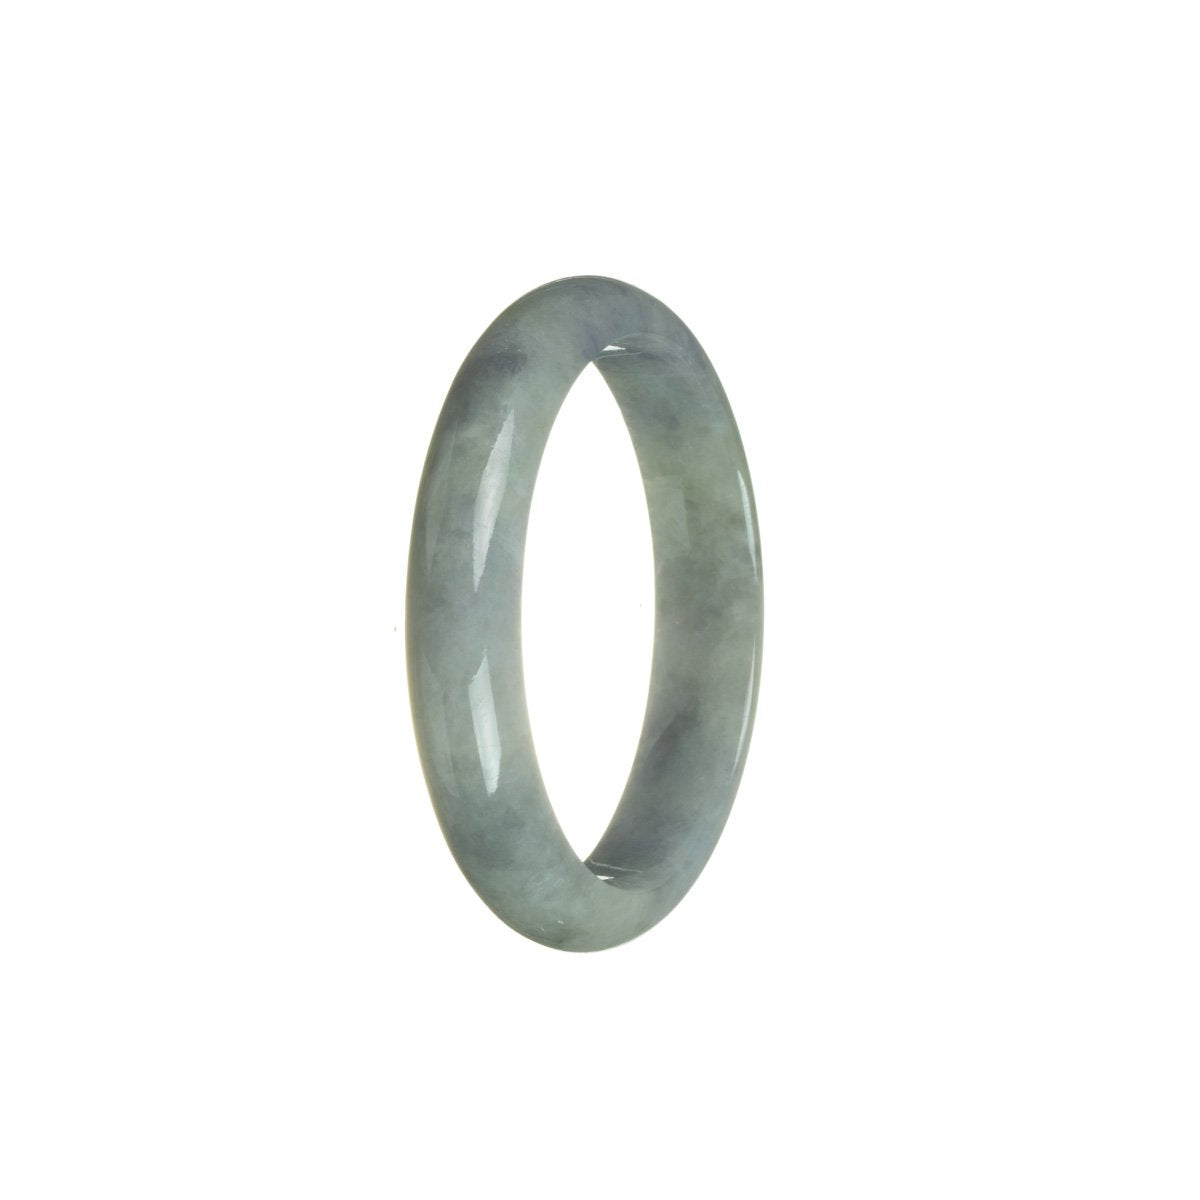 Authentic Grade A Green with Lavender and Grey Burmese Jade Bangle Bracelet - 52mm Half Moon